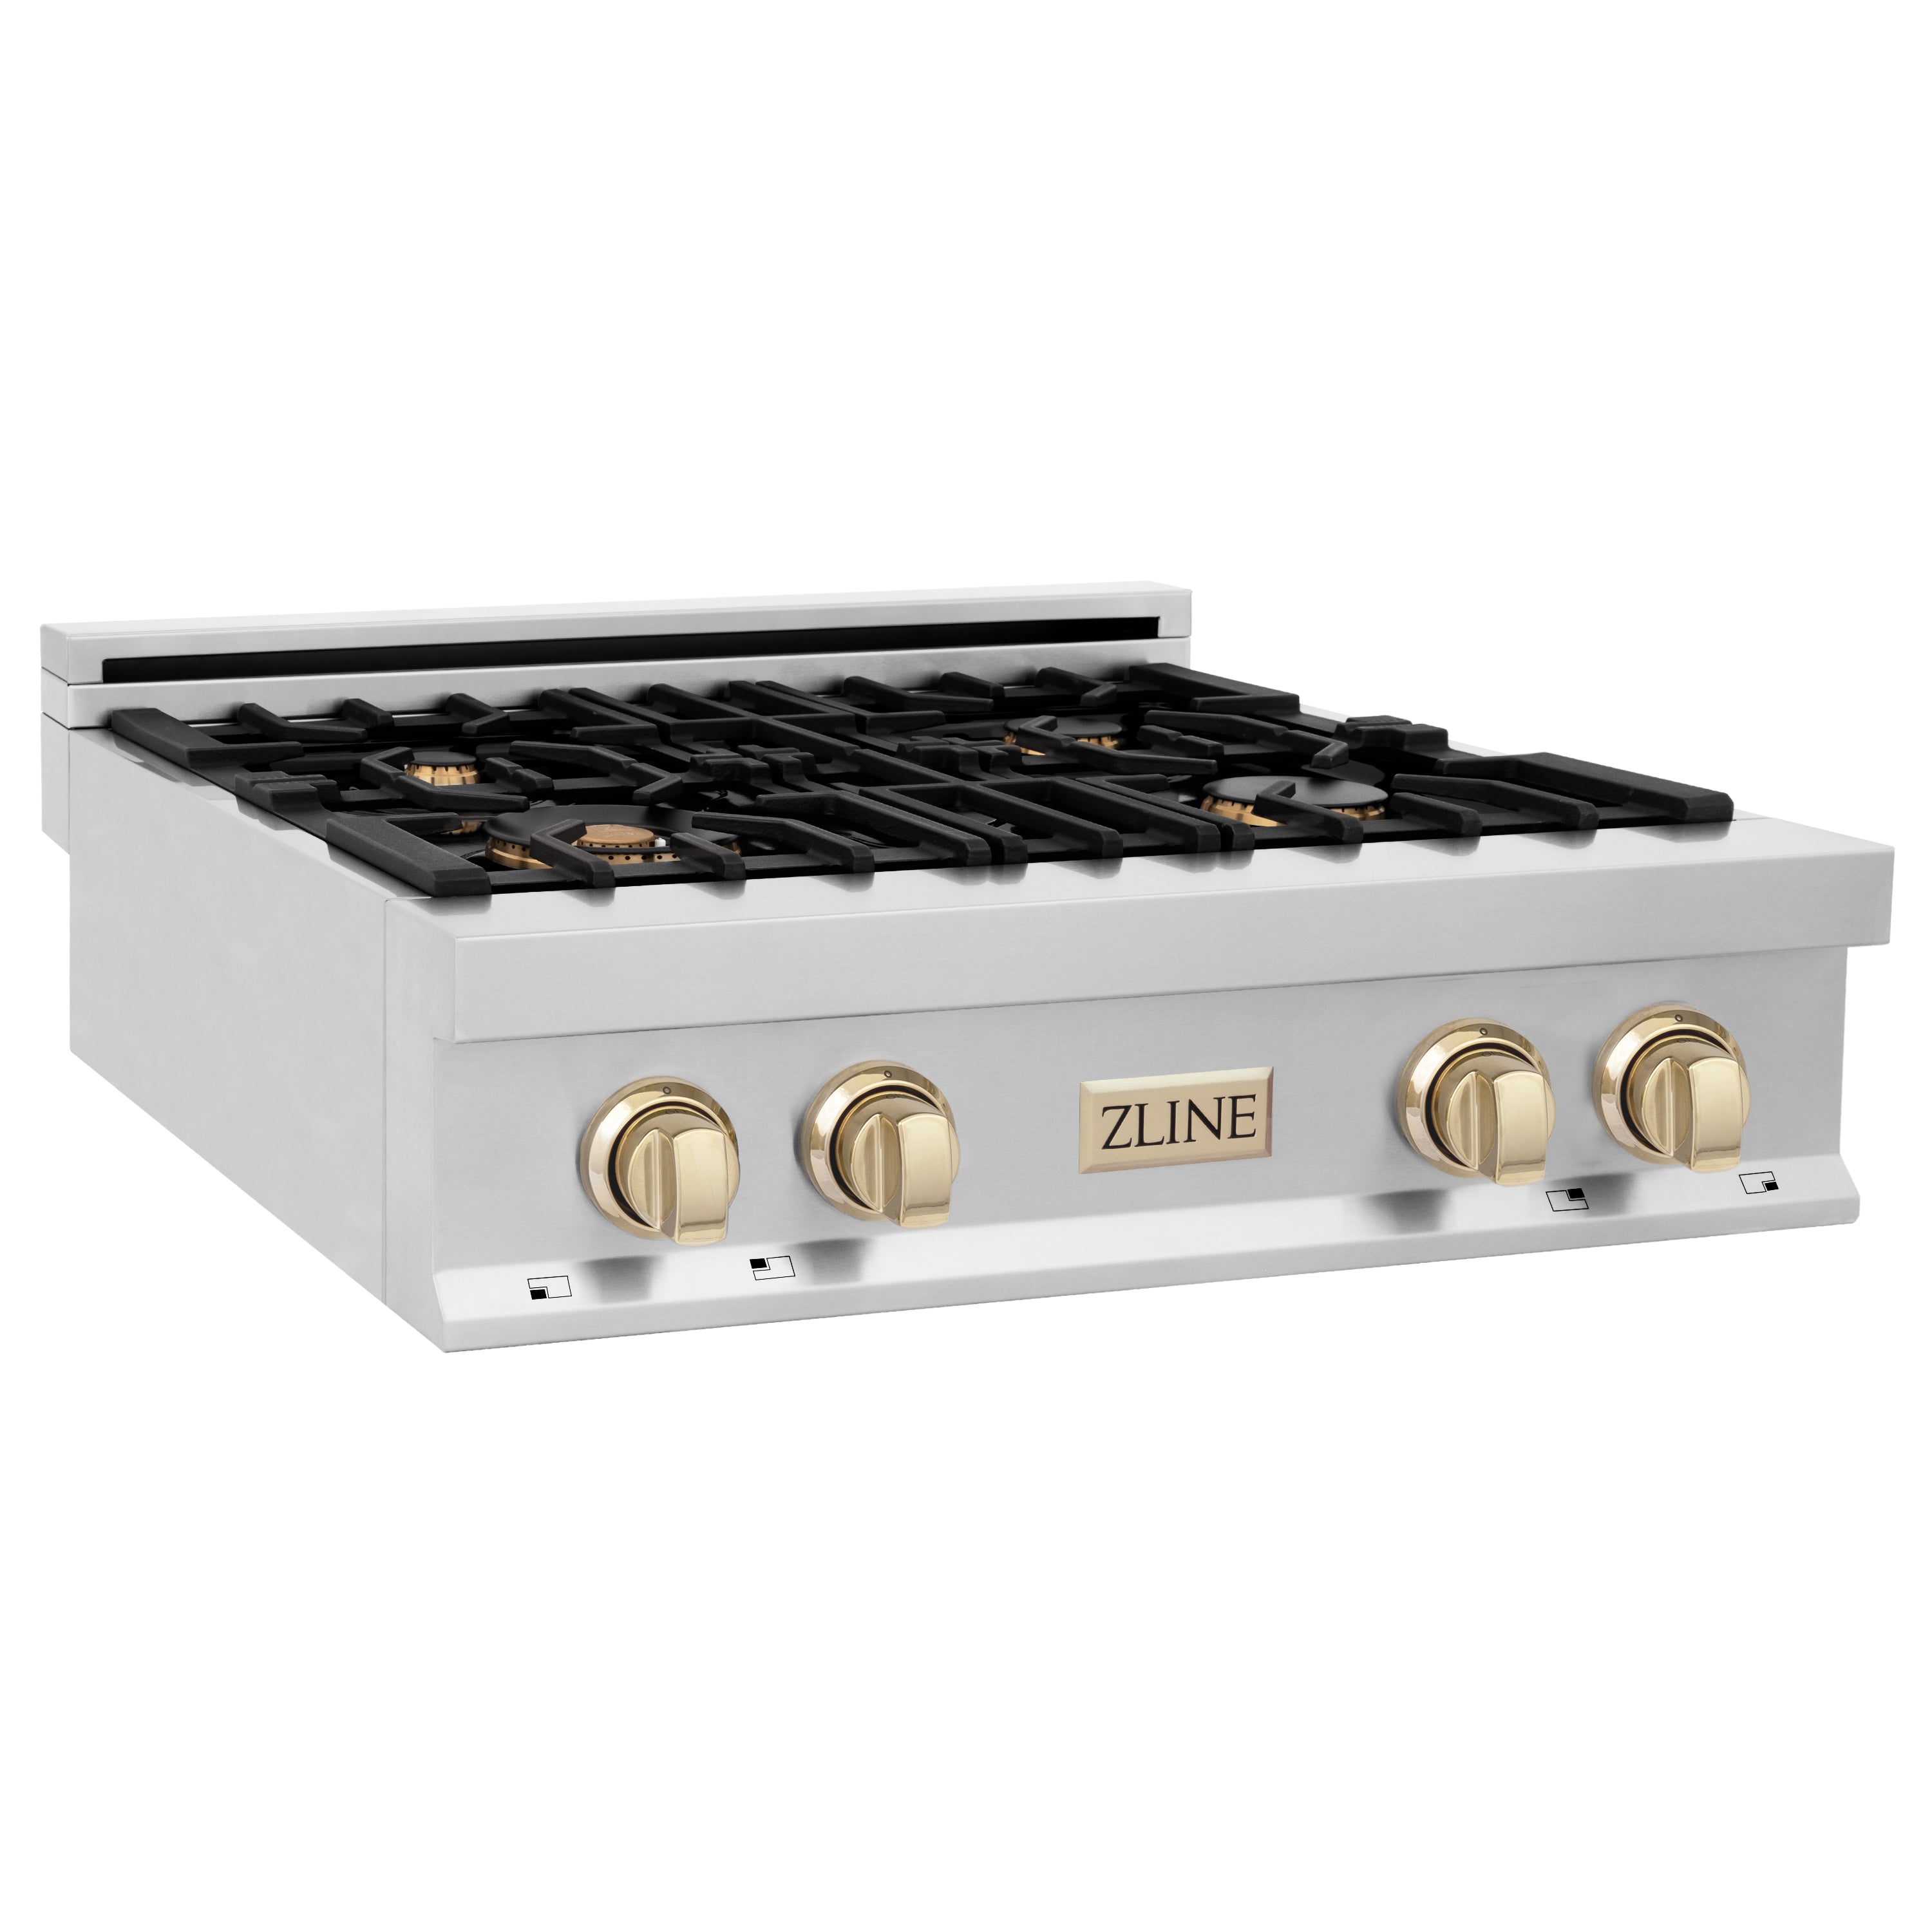 ZLINE Autograph Edition 30" Porcelain Rangetop with 4 Gas Burners in Stainless Steel and Accents (RTZ-30)